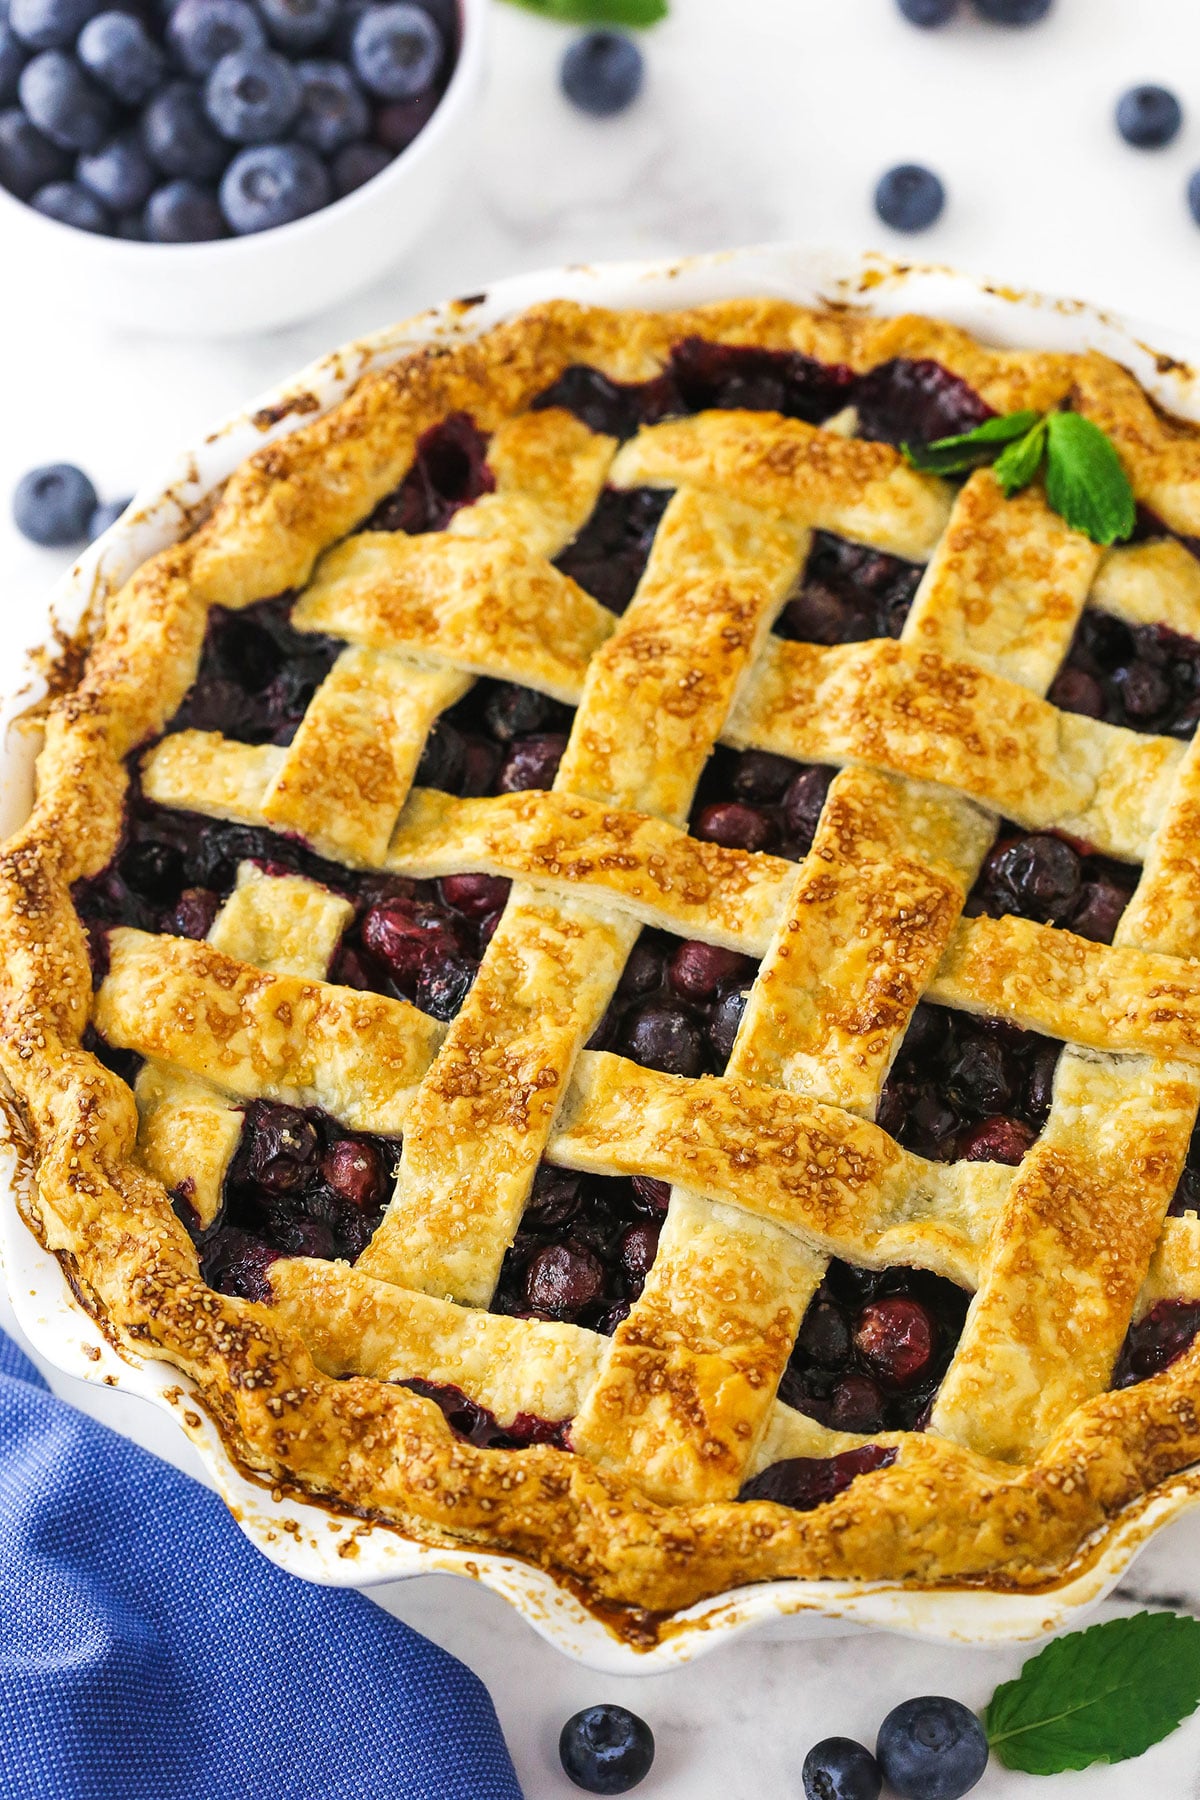 A close-up shot of a blueberry pie with a bowl of fresh berries behind it